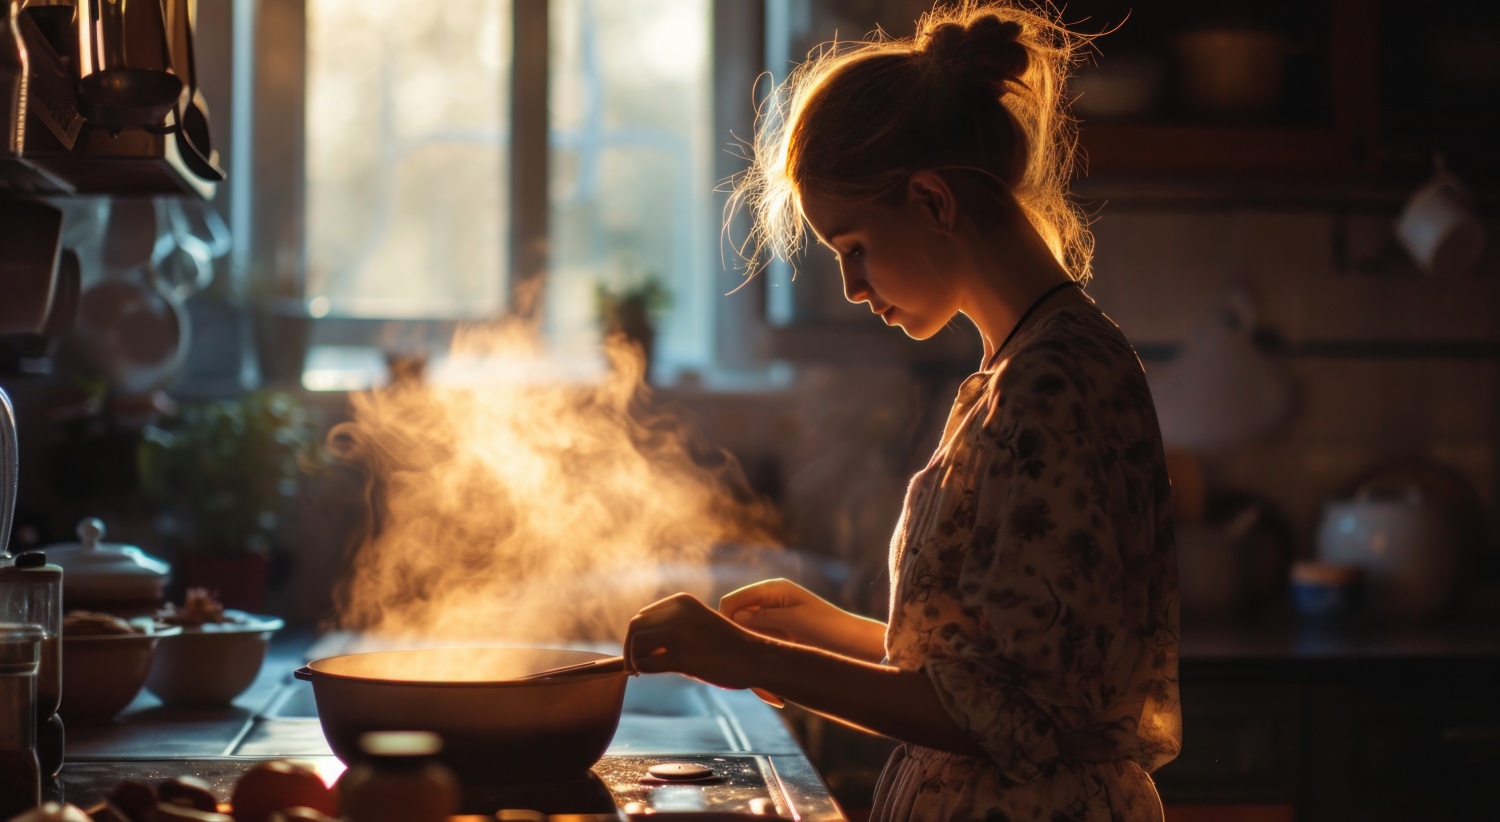 How to Dispel Cooking Odors From Your Hair